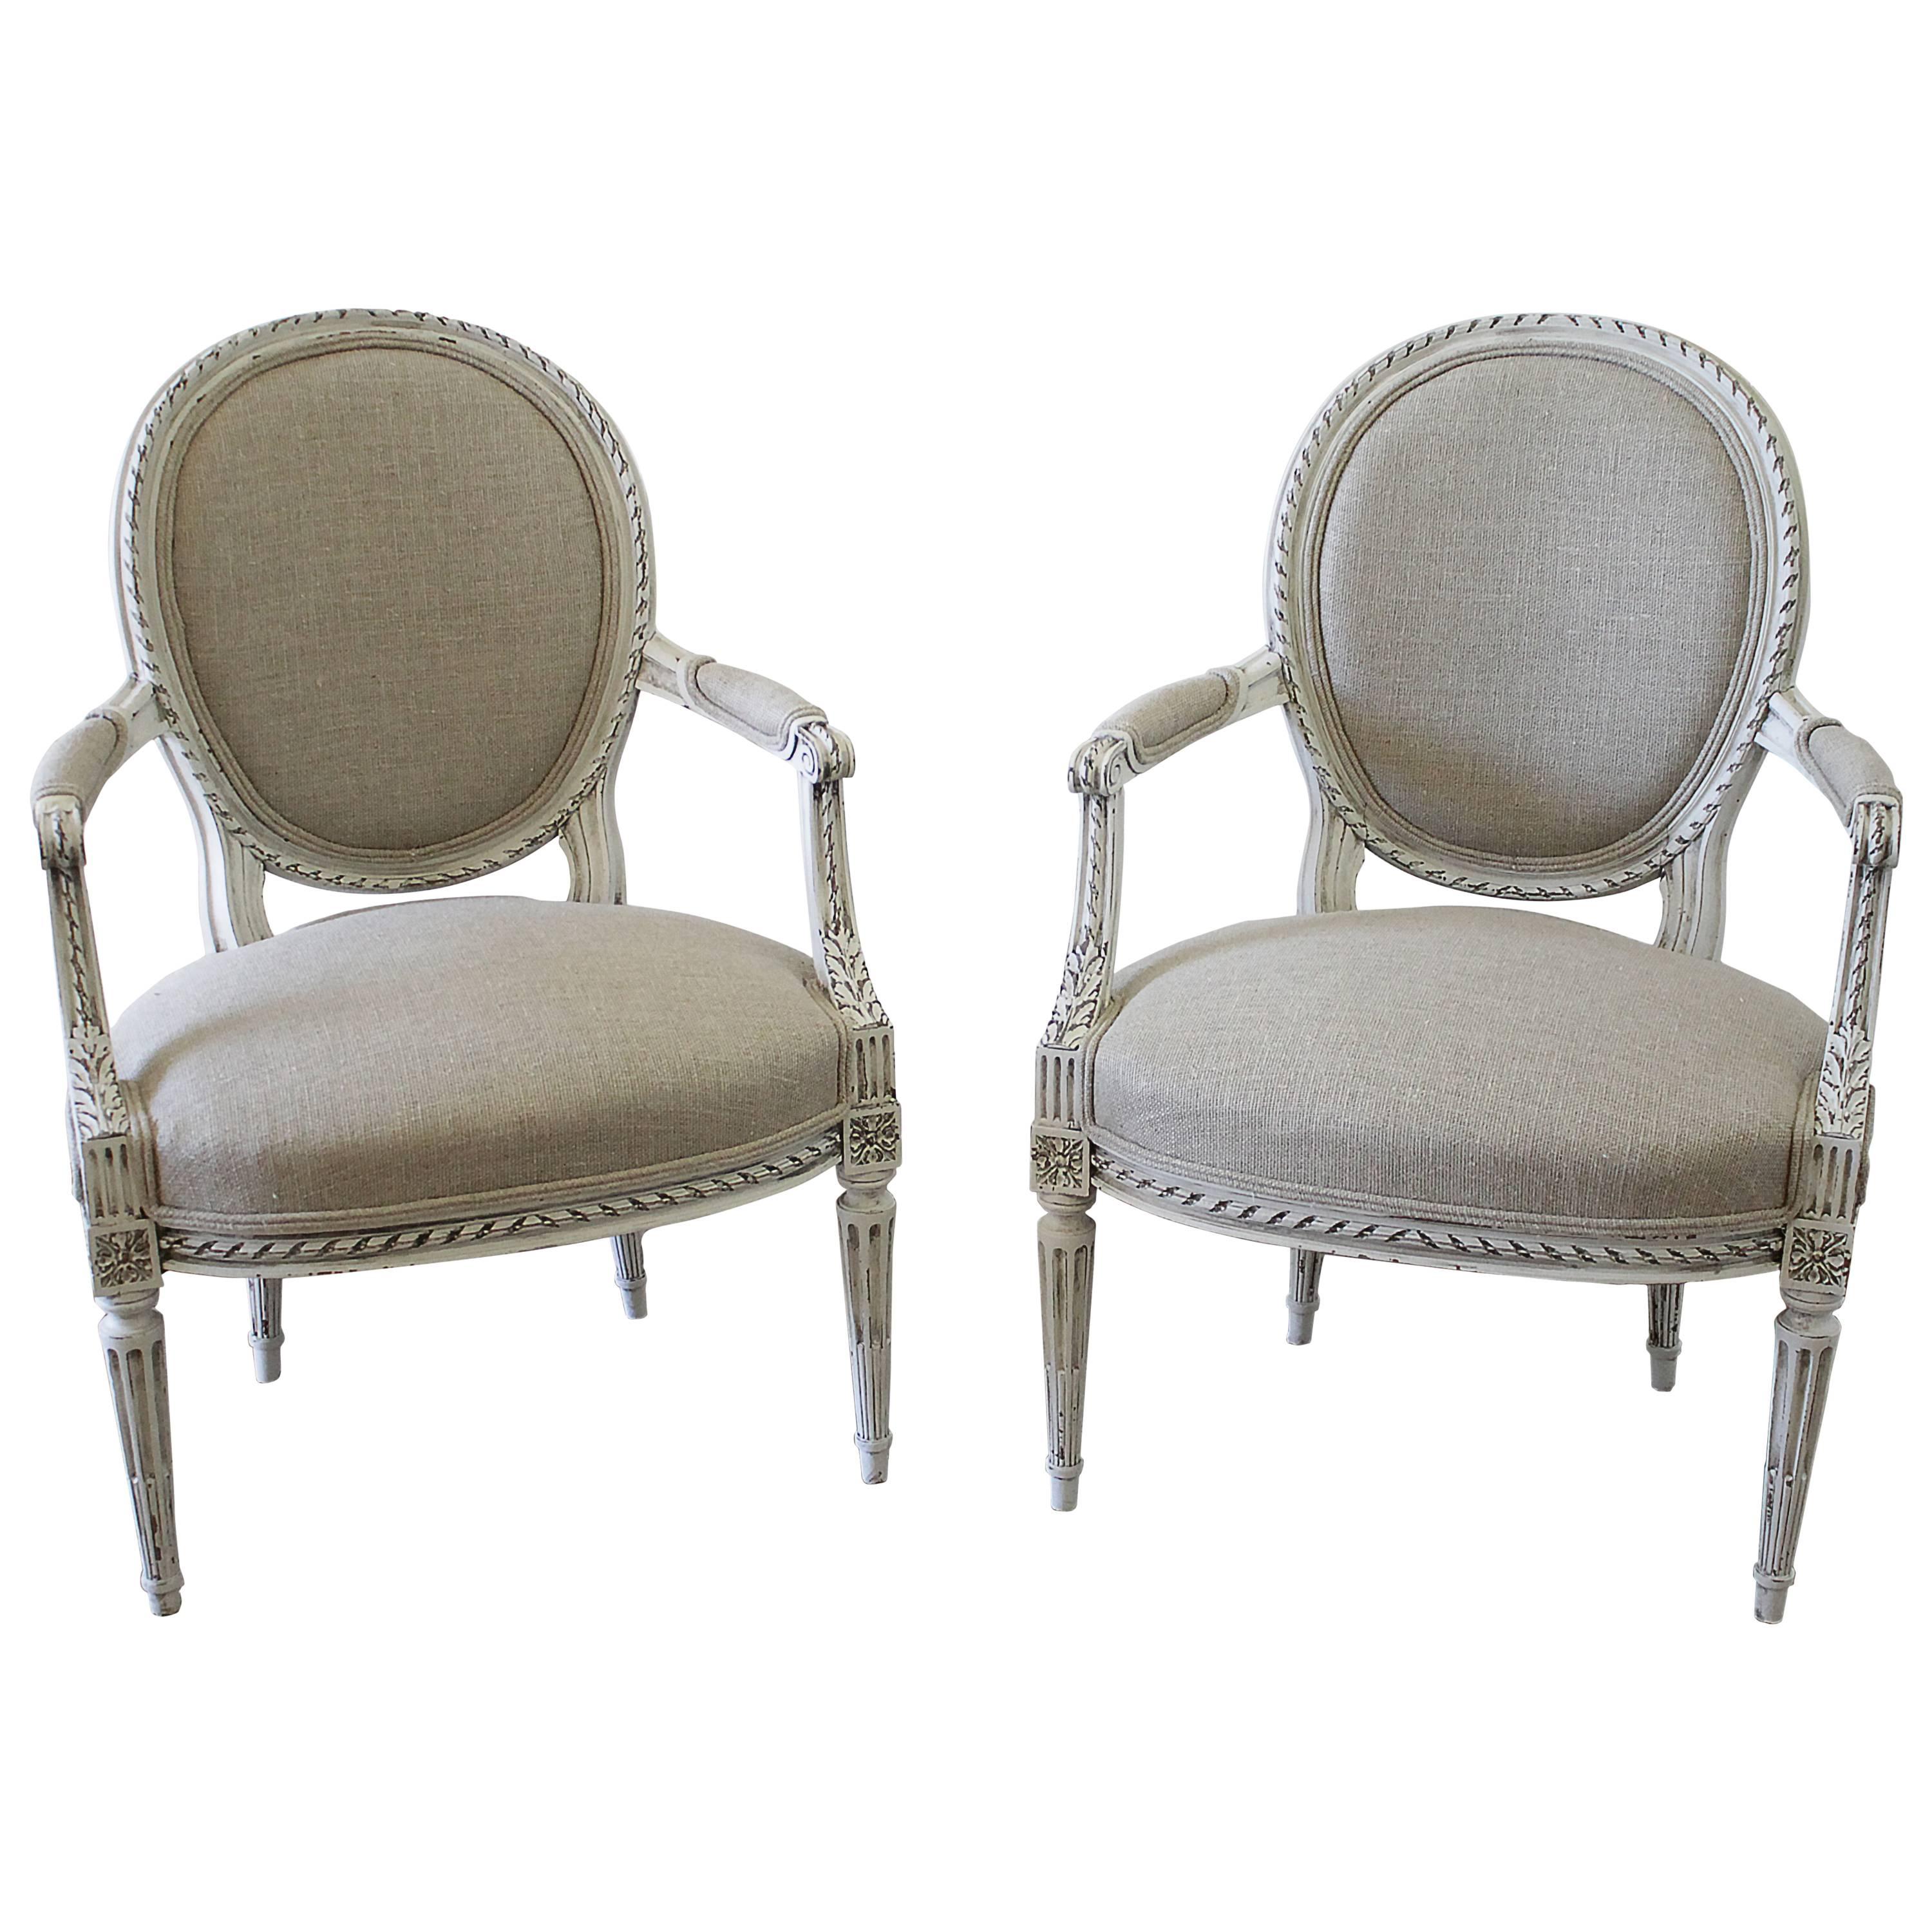 Late 19th Century Carved Louis XVI Style Armchairs